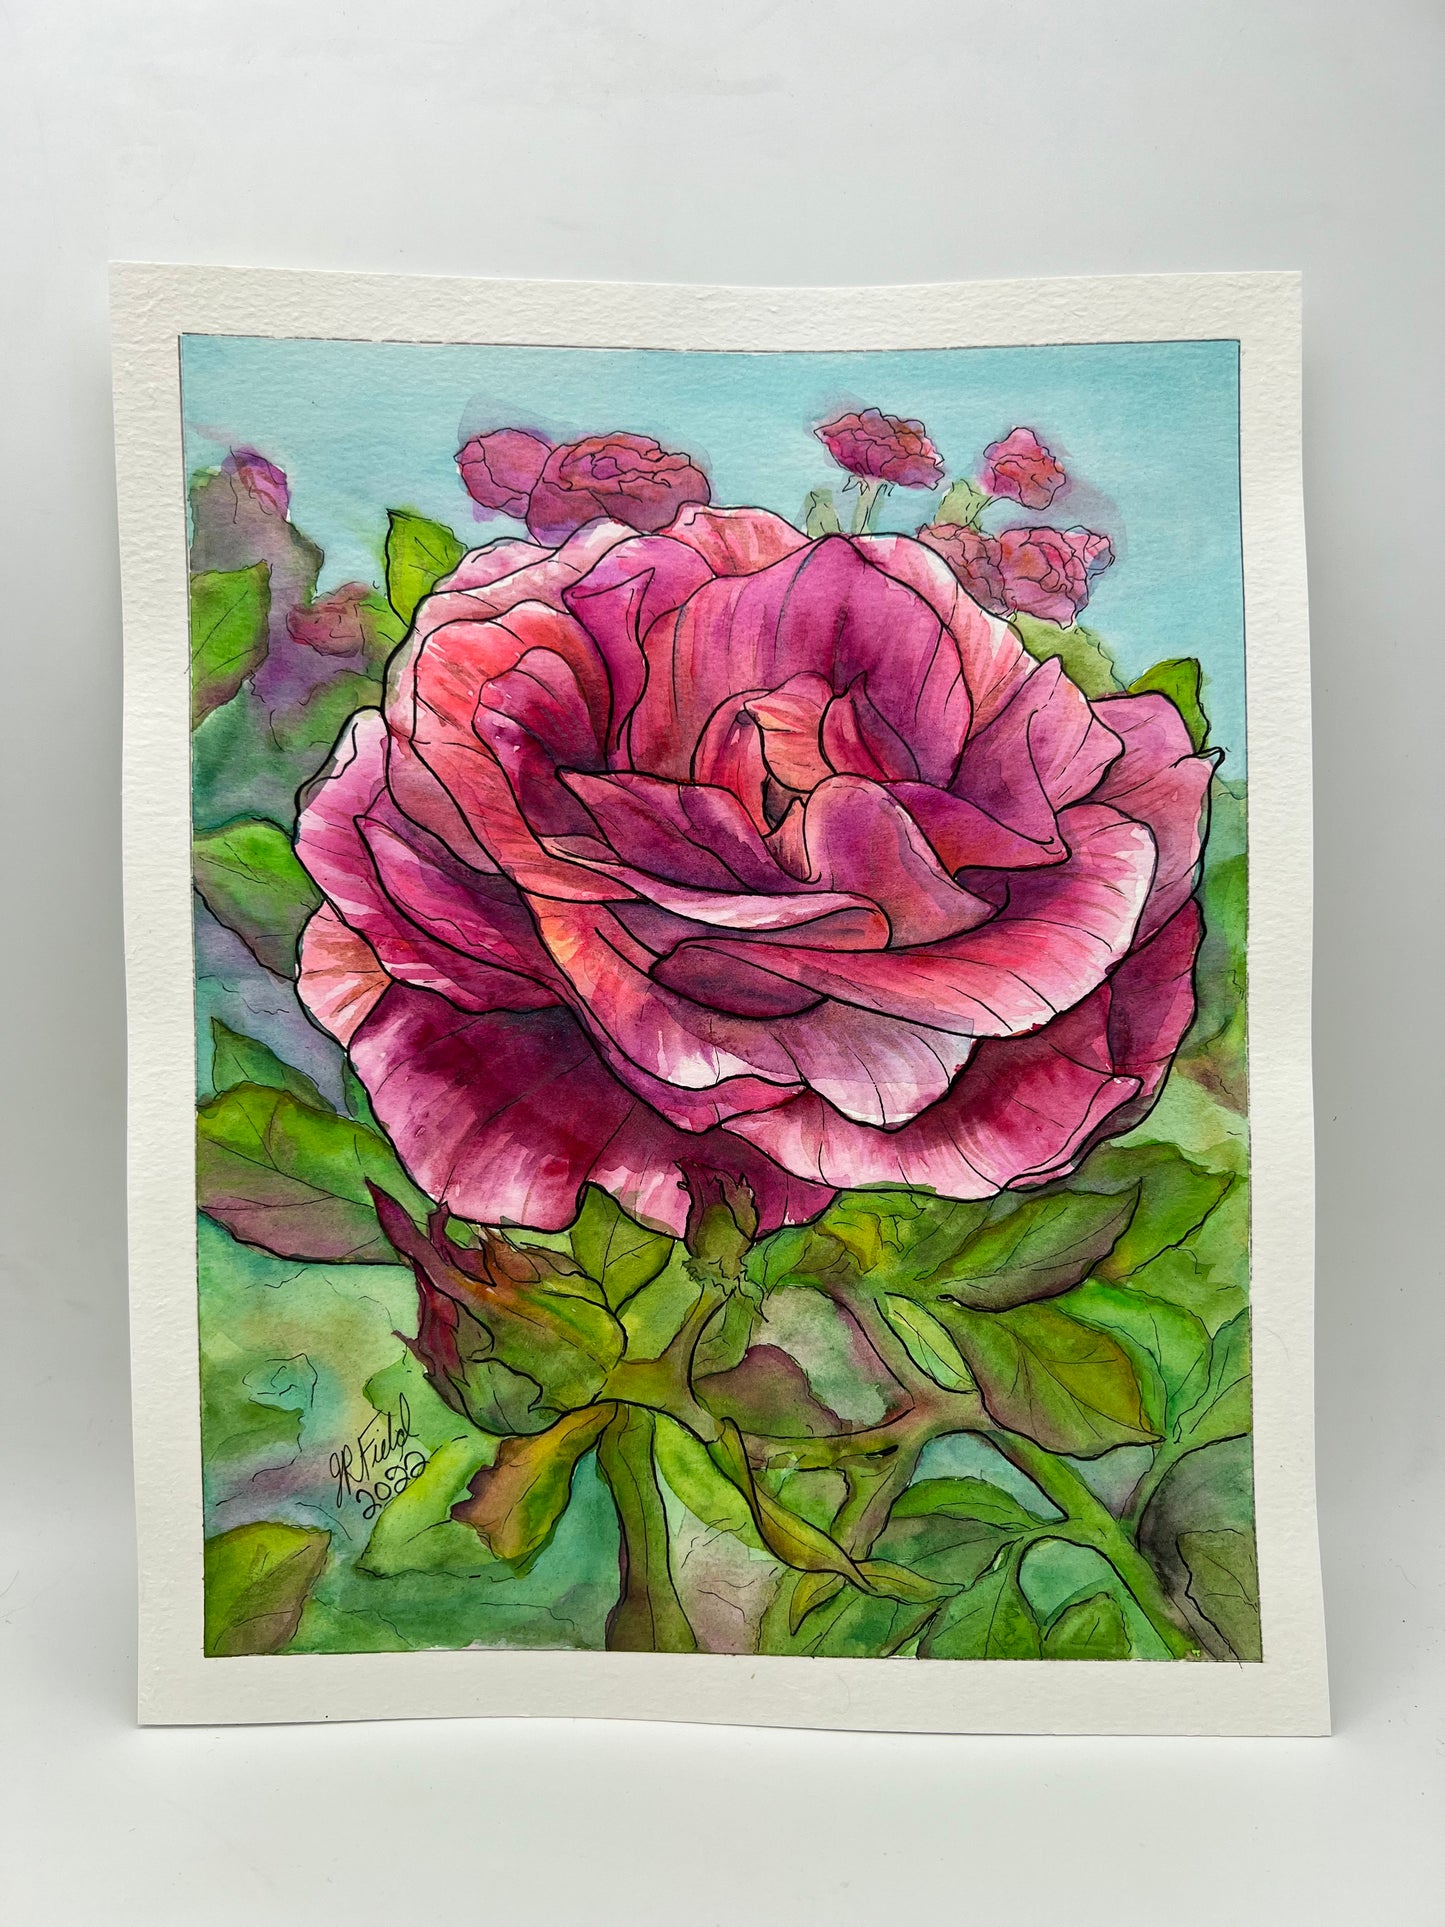 A Rose Among Thorns - Watercolor Painting